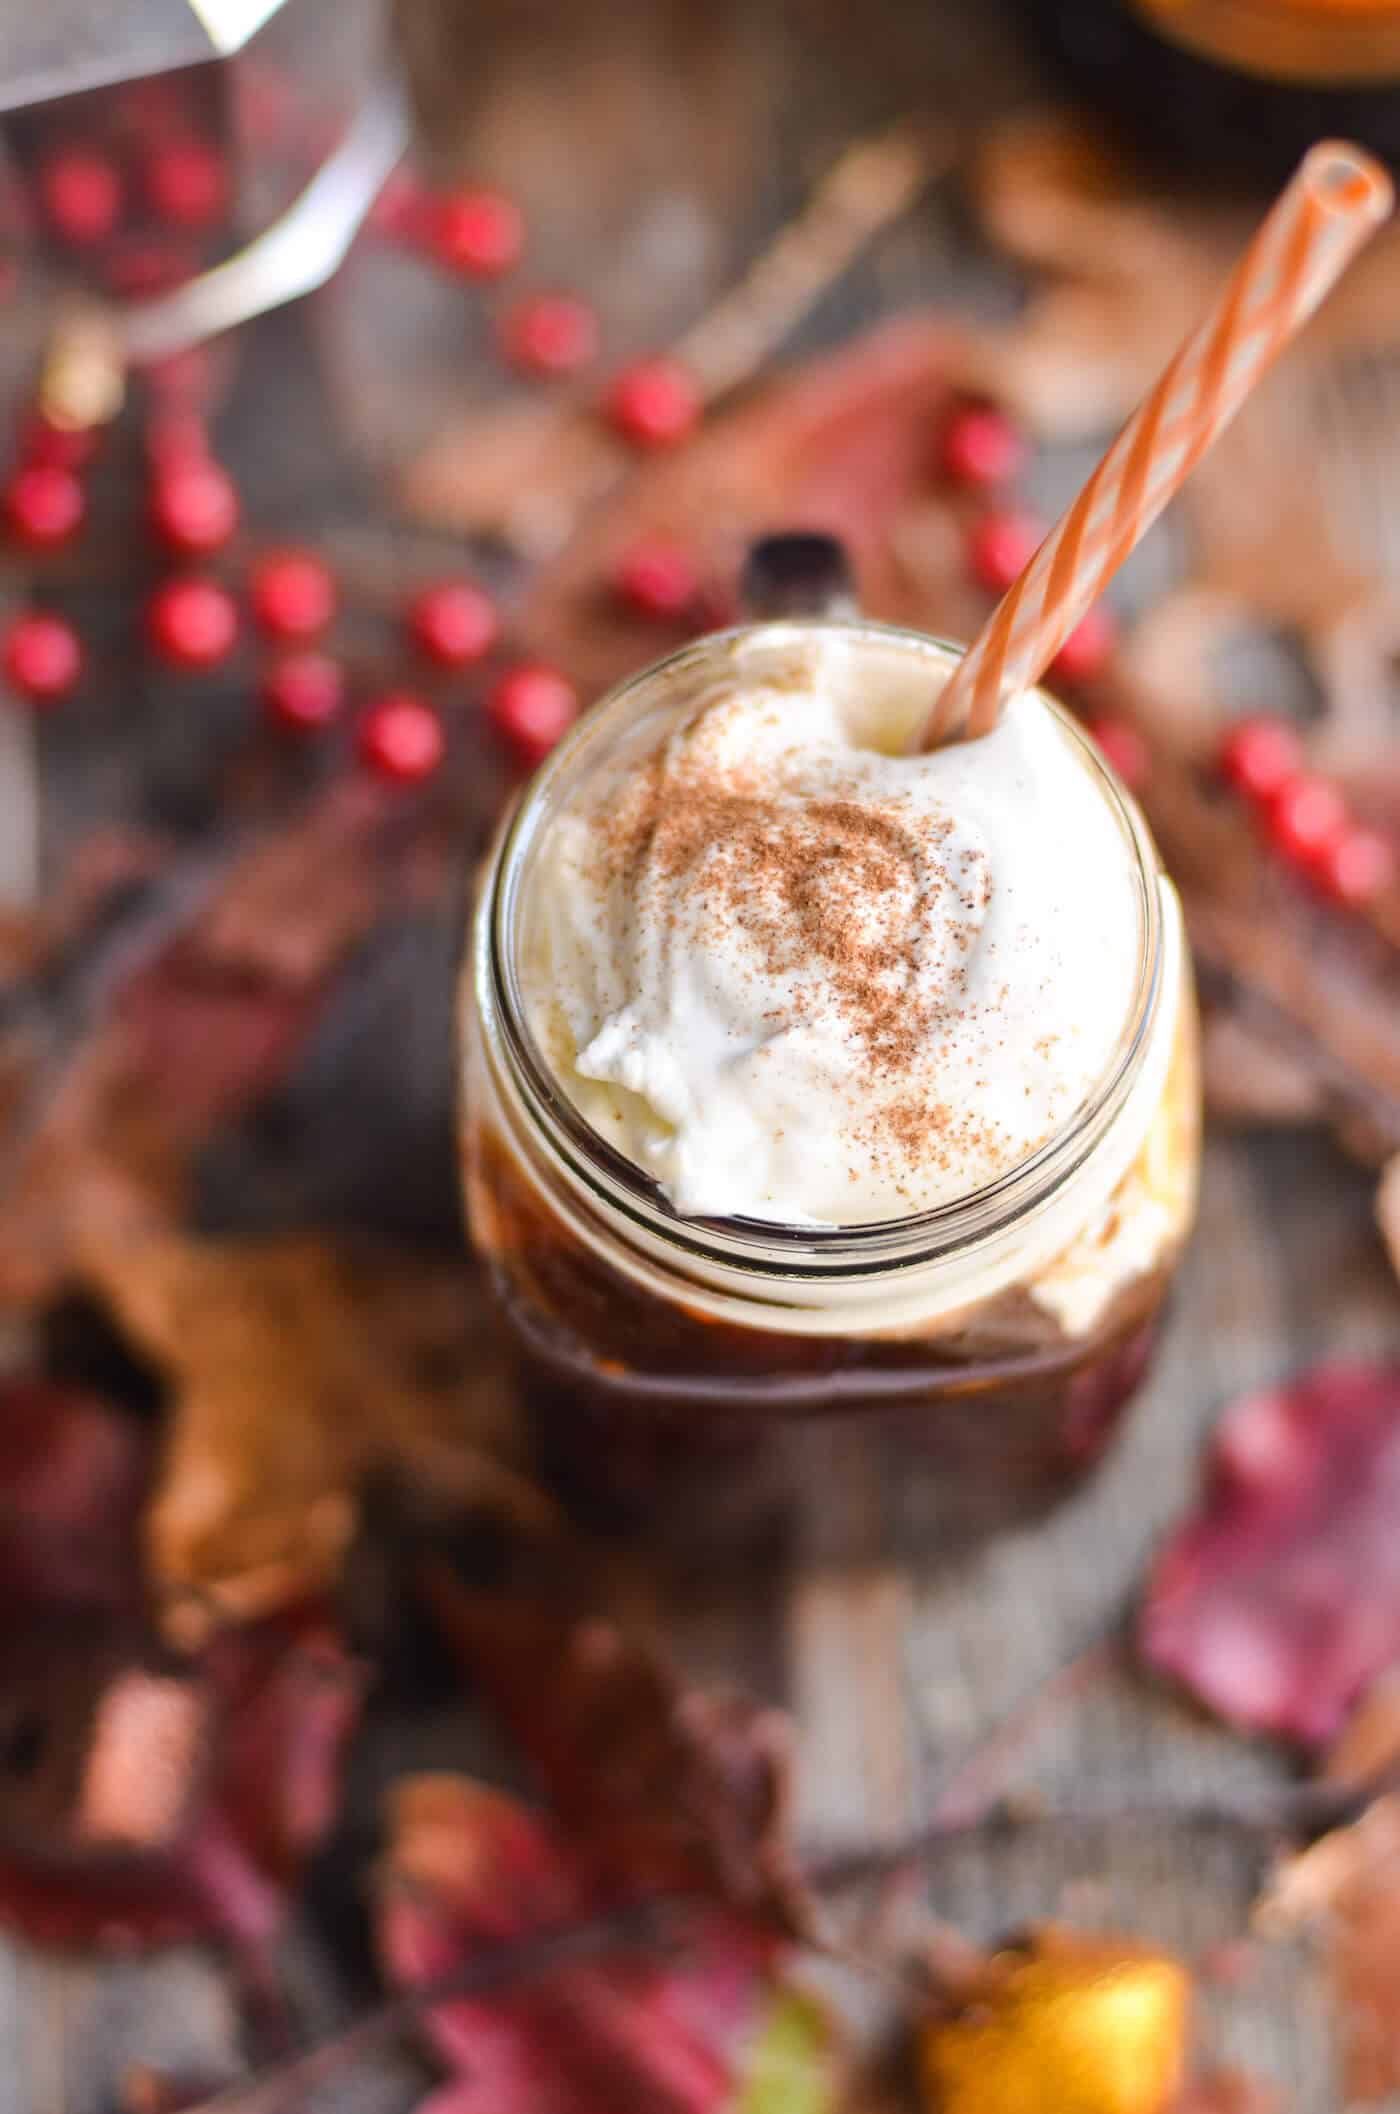 If you love drinks with Kahlua that are perfect for fall, this pumpkin pie spice cocktail is for you! Don't forget to add the whipped cream.